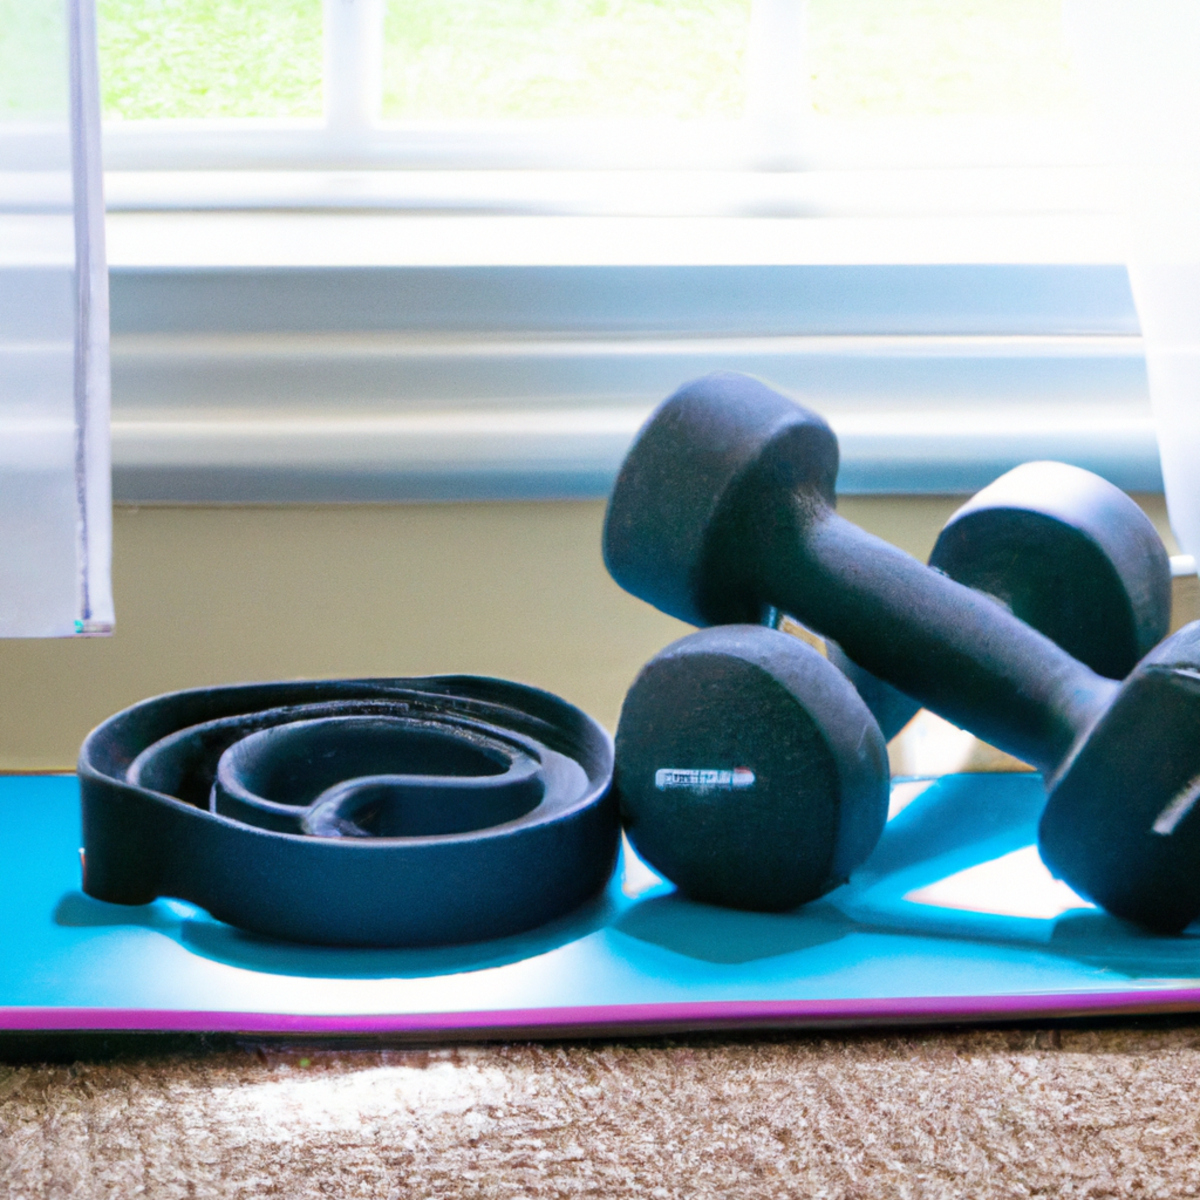 The photo captures a minimalist home gym setup with a yoga mat, resistance bands, and a set of dumbbells neatly arranged on the floor. The natural light streaming in from the window highlights the texture of the mat and the sleek design of the bands. The dumbbells, ranging from light to heavy, are stacked in ascending order, ready for a full-body workout. The composition of the photo exudes a sense of calm and simplicity, inviting the reader to try out these bodyweight exercises in the comfort of their own home.